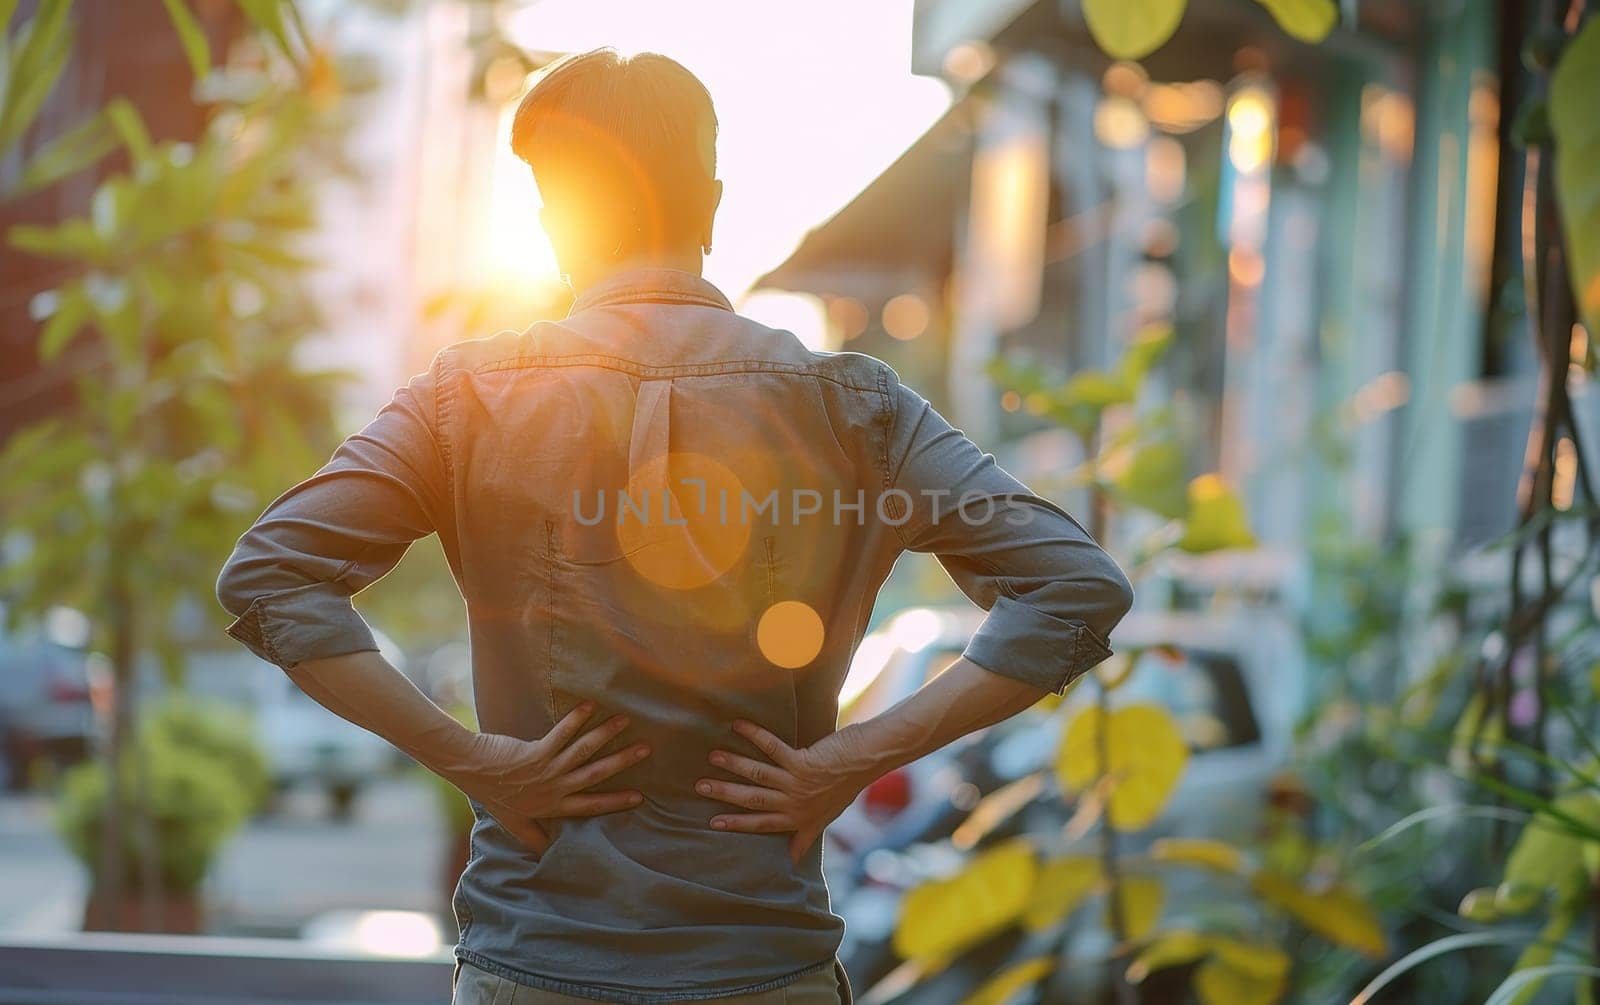 A person stands with hands on hips, facing the sunset. The golden hour light wraps around the silhouette, evoking a sense of contemplation and serenity. by sfinks